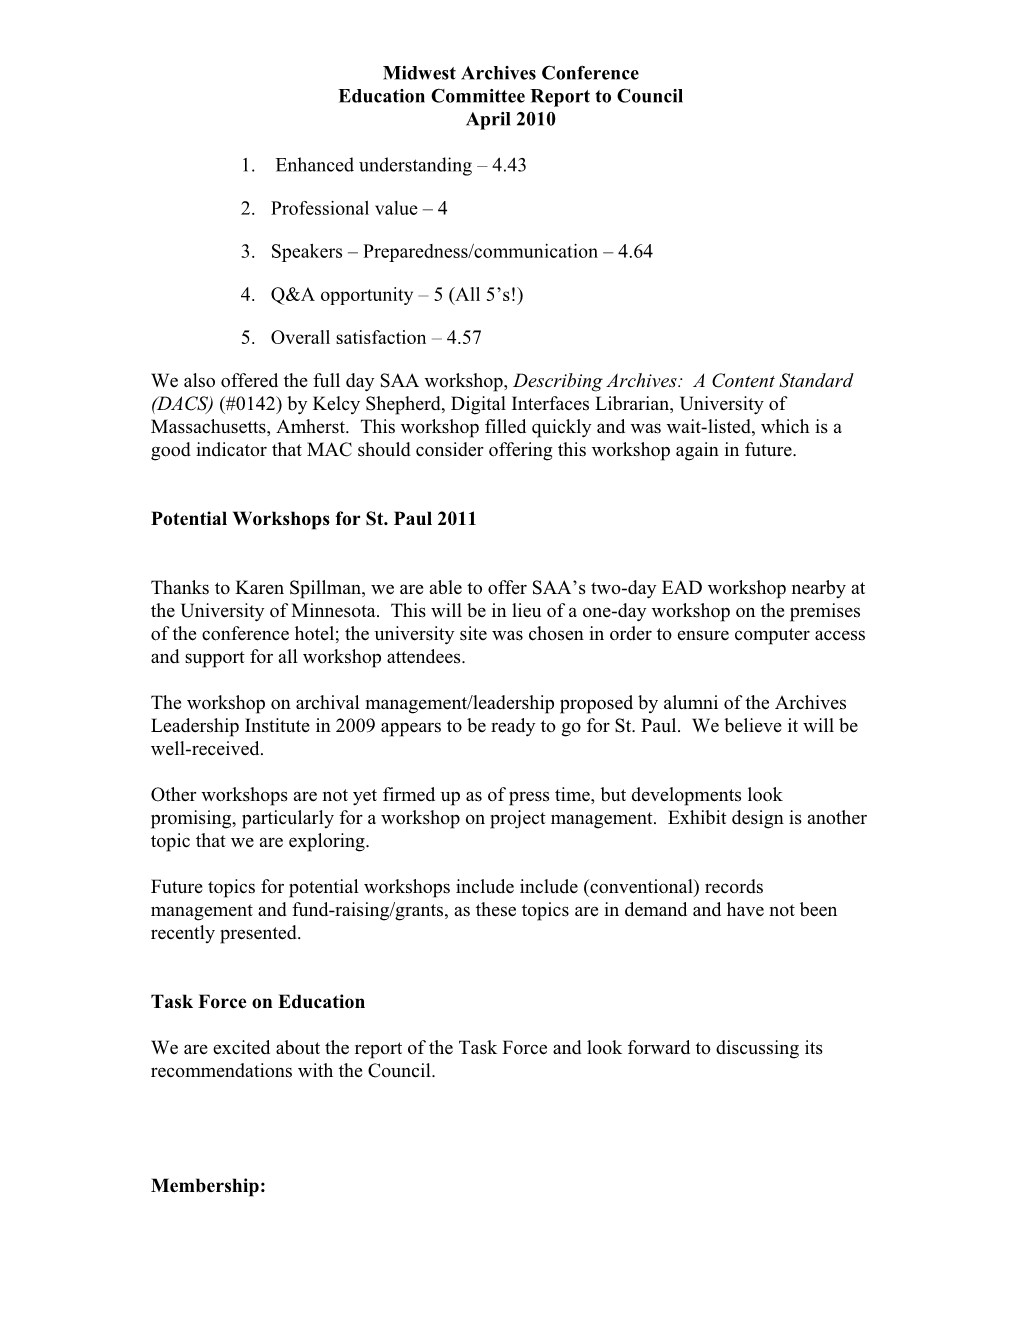 Education Committee Report to Council